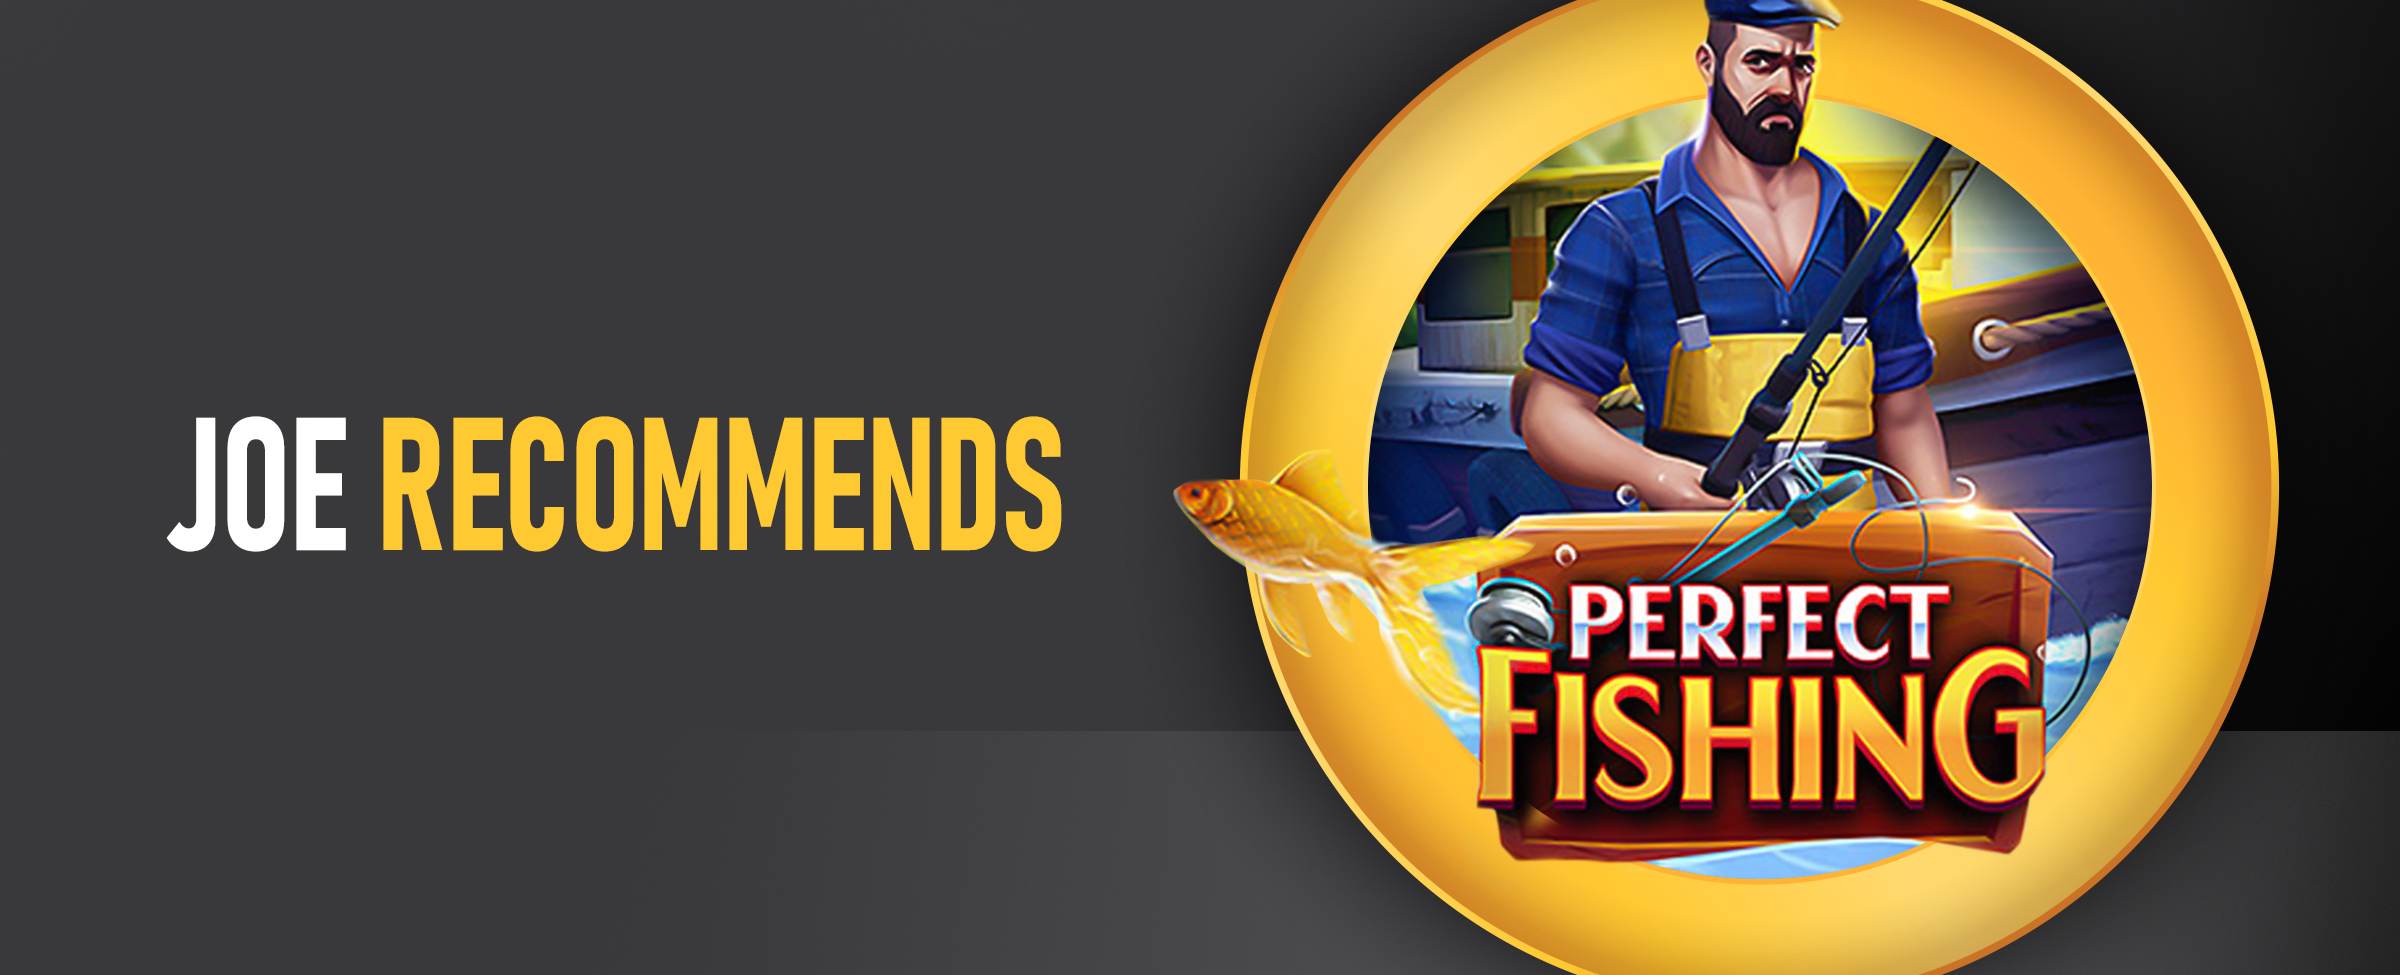 The logo for the Joe Fortune online pokie, Perfect Fishing features alongside the wording ‘Joe Recommends’. On a dark background..